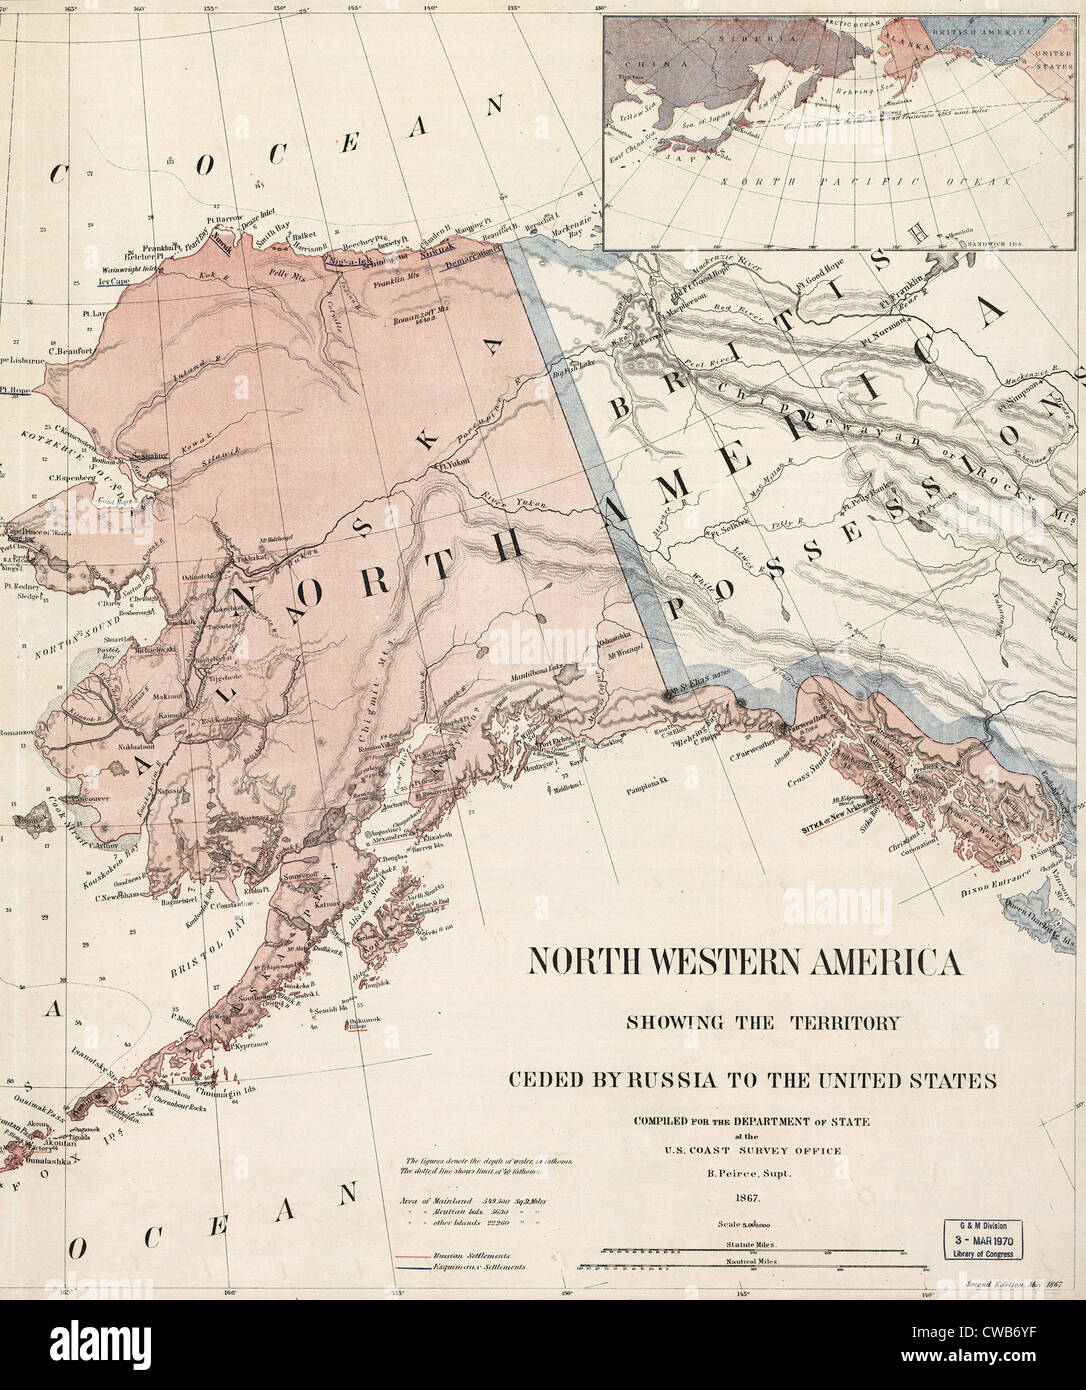 Northwestern America showing the territory ceded by Russia to the United States, 1867 Stock Photo